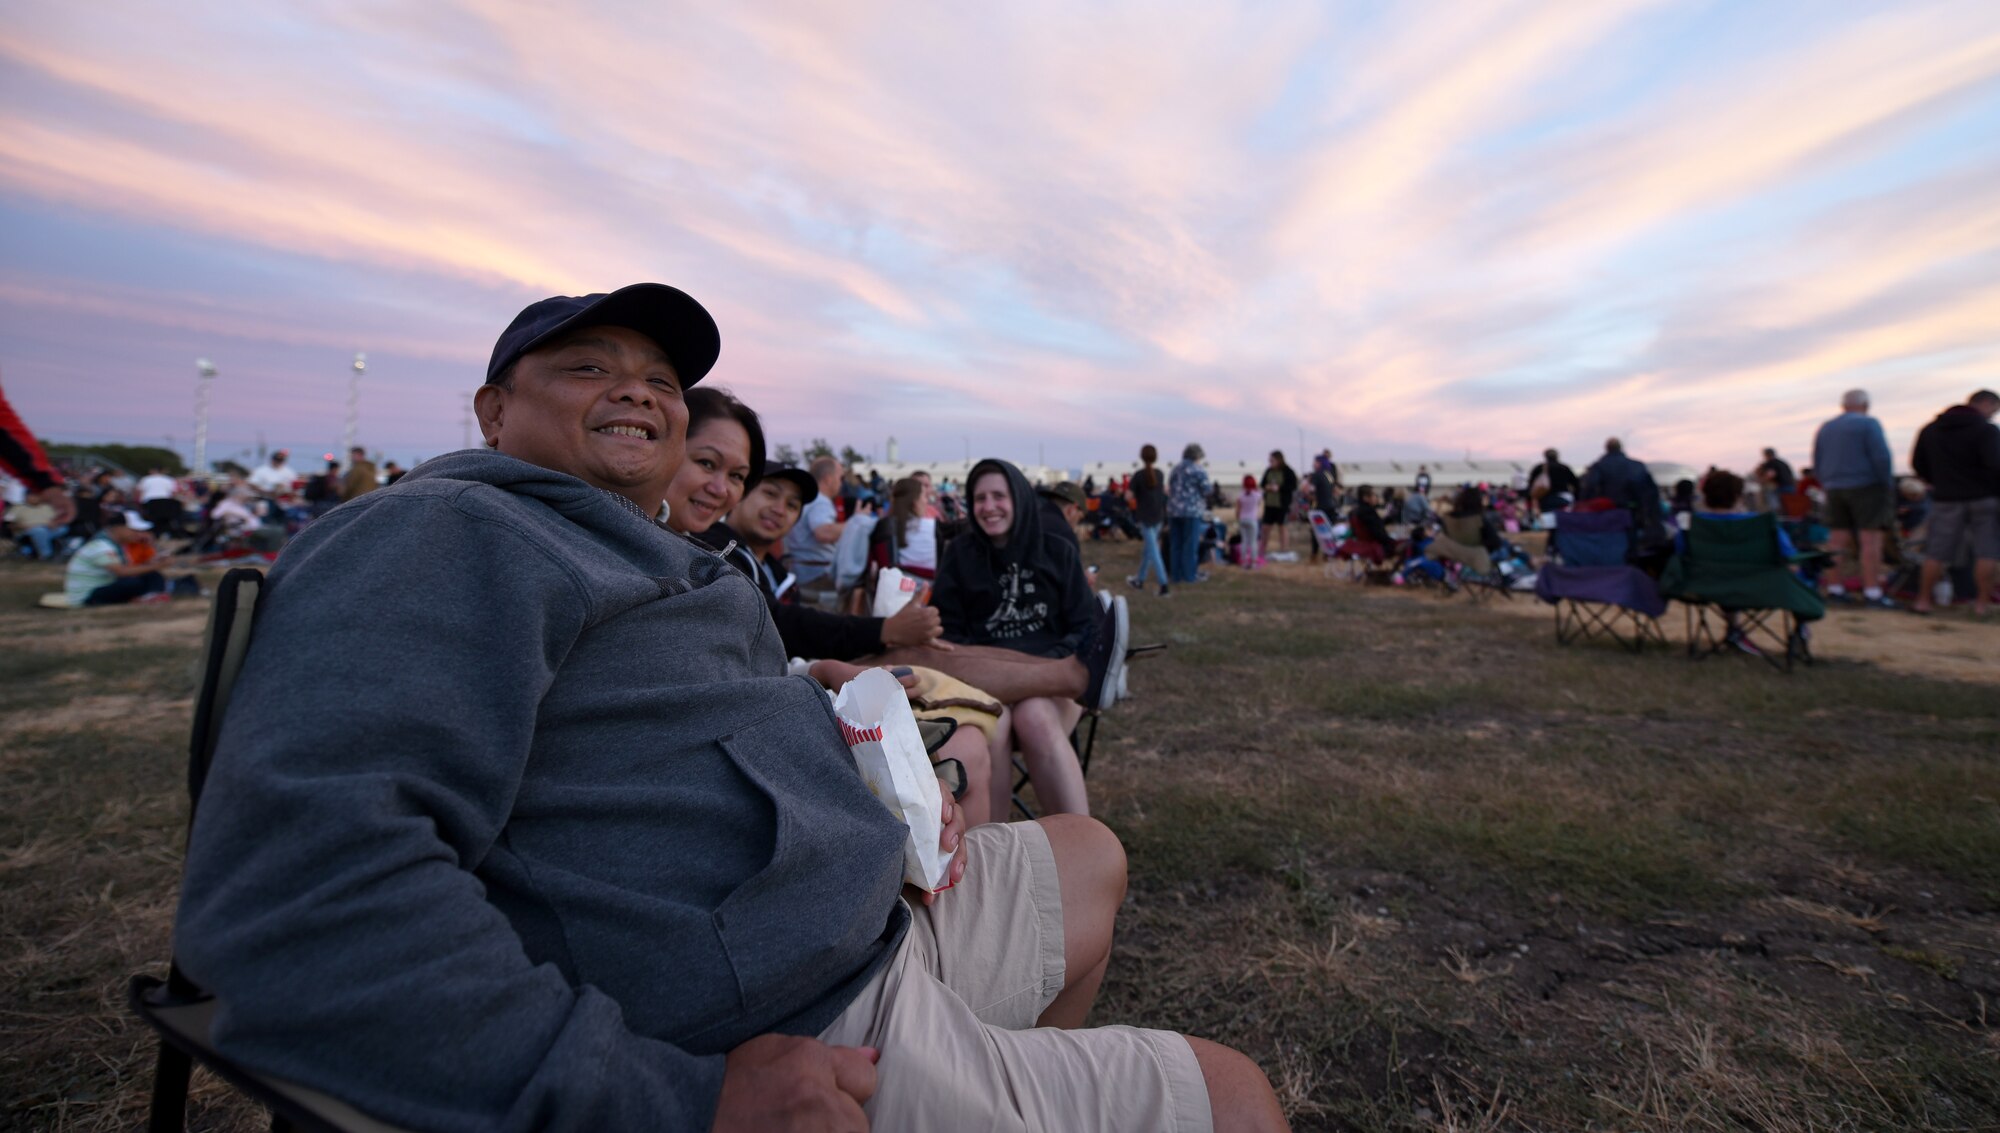 A family sits in anticipation of Travis Air Force Base Calif.'s drone light show July 5, 2018. In addition to the light show, the celebration included a rock wall, bounce houses and food trucks for Travis families. (U.S. Air Force photo by Airman 1st Class Christian Conrad)